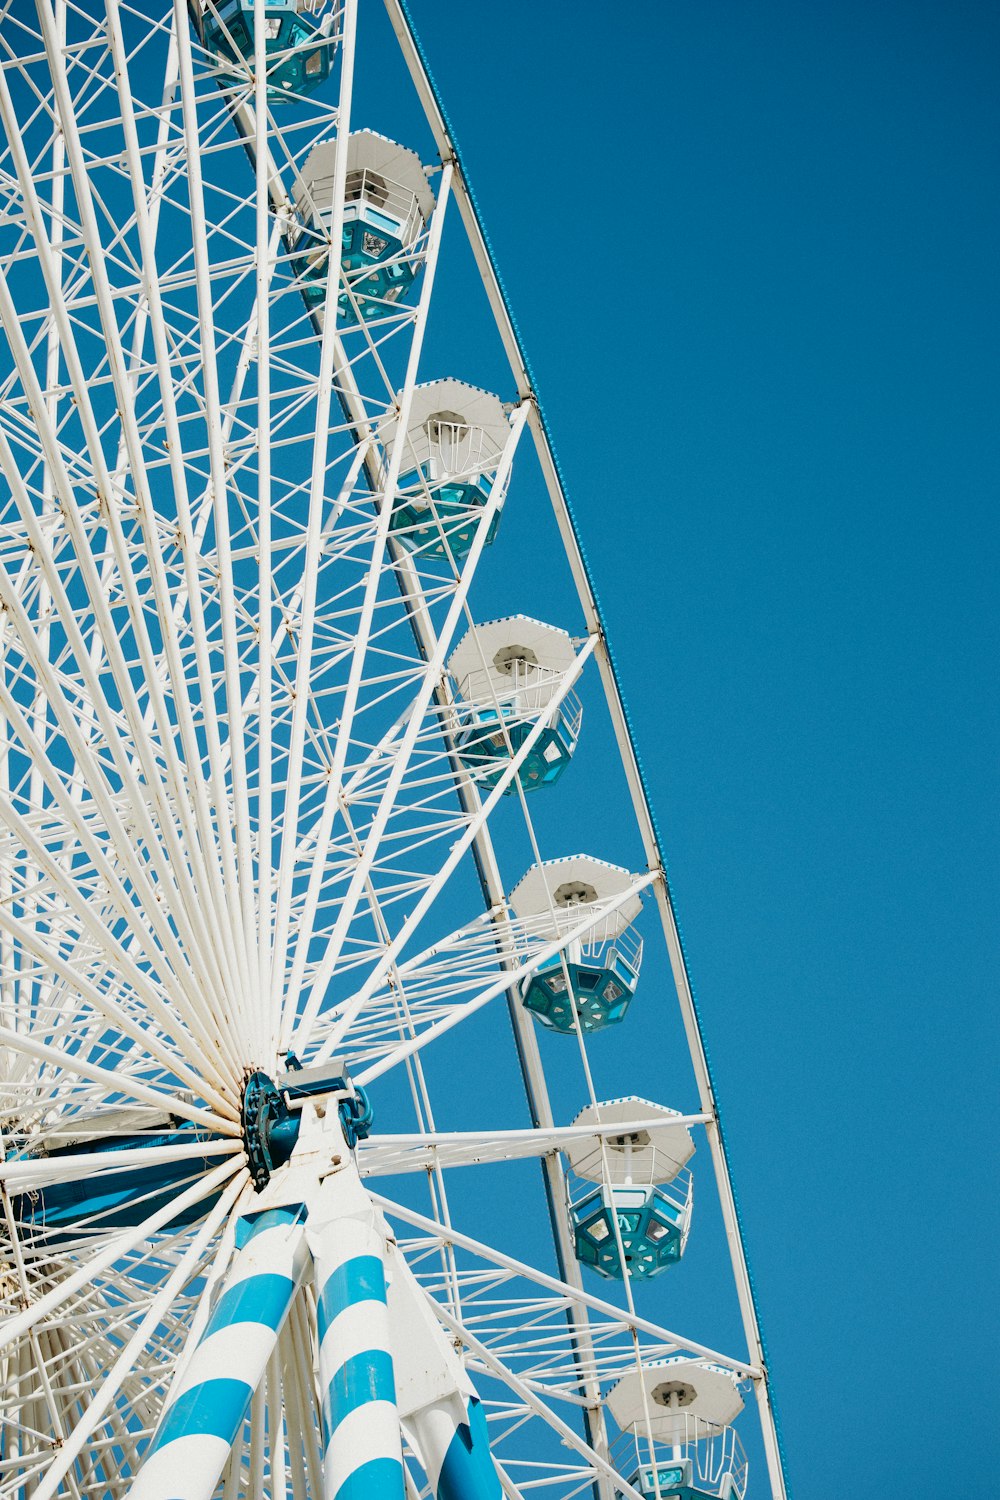 a large white ferris wheel with blue and white stripes